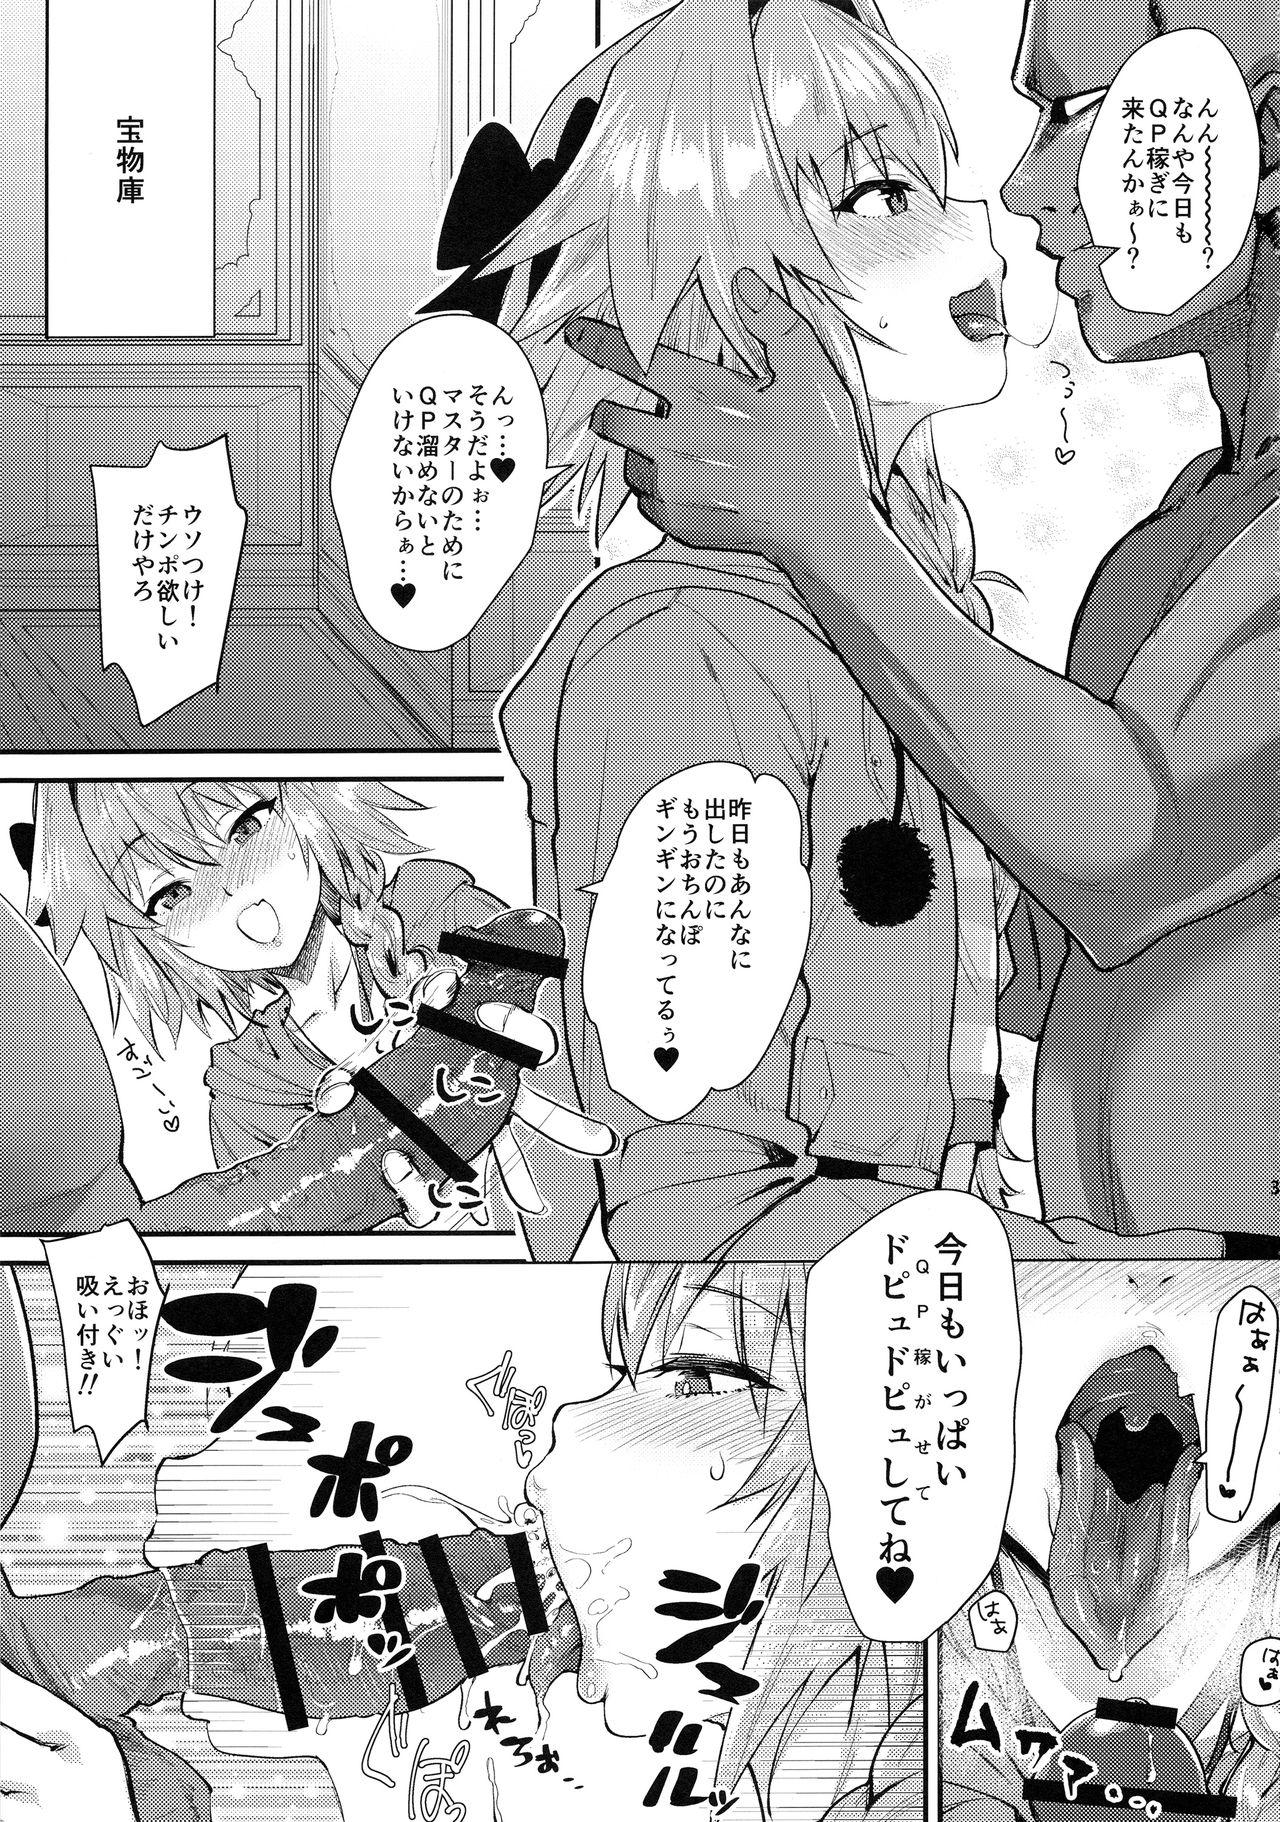 Pussylick 5000 Chou QP Hoshii! - Fate grand order Smooth - Page 4